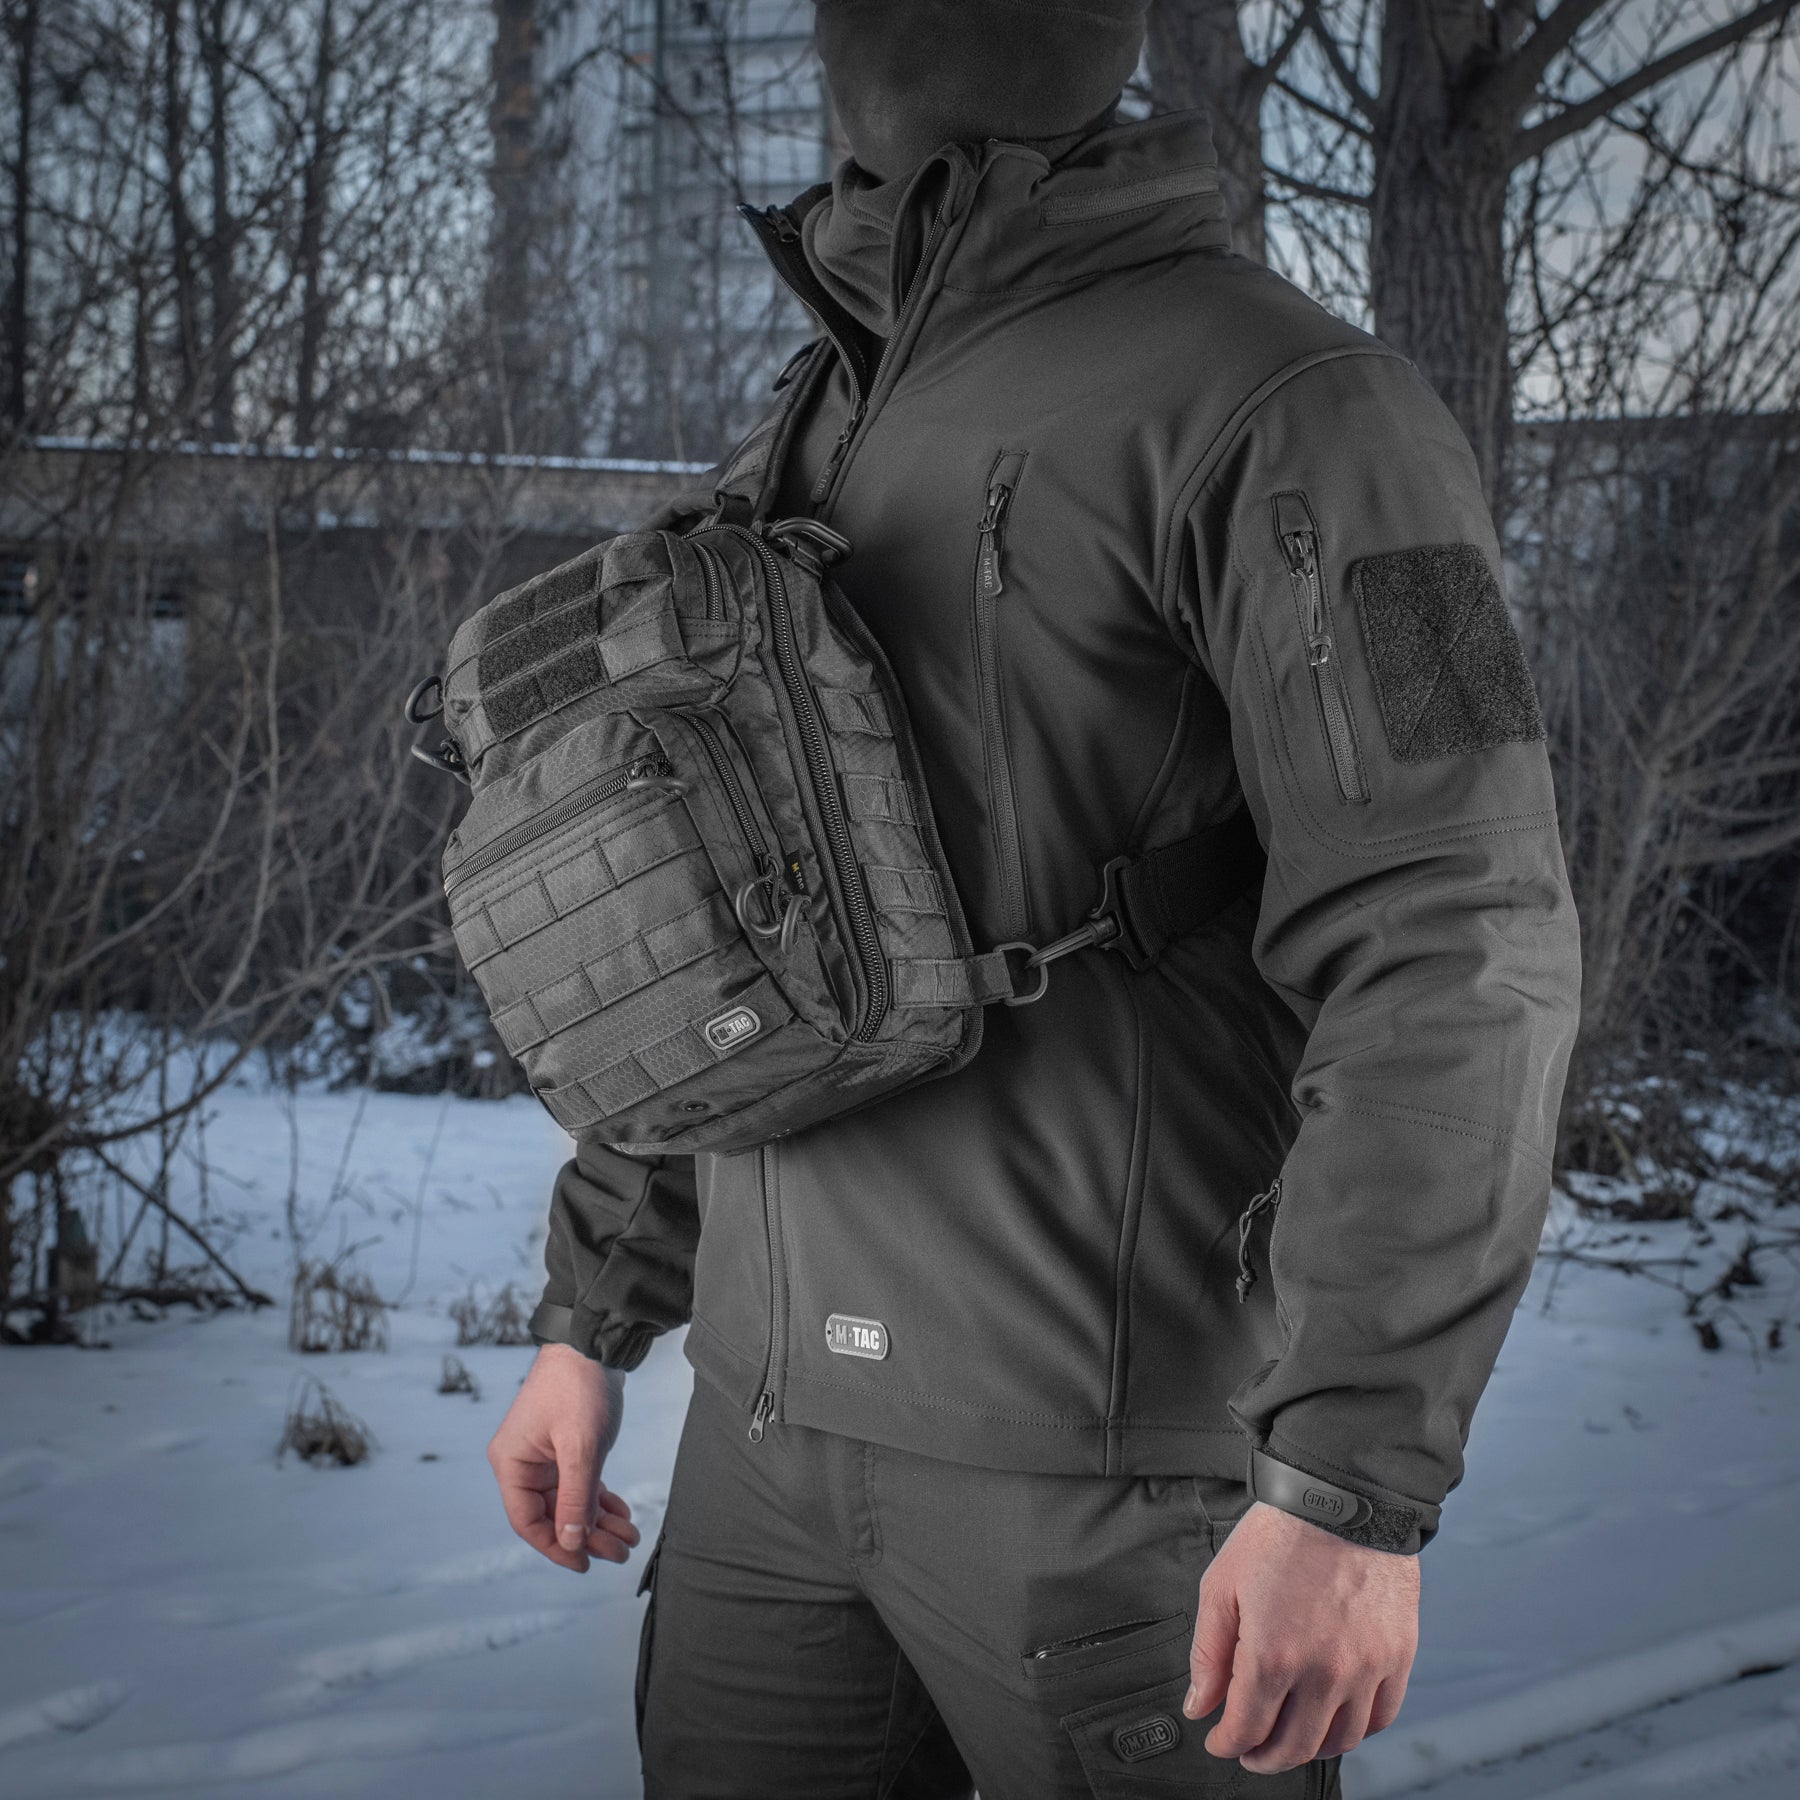 TacStore Tactical & Outdoors M-Tac Backpack Large Elite Hex